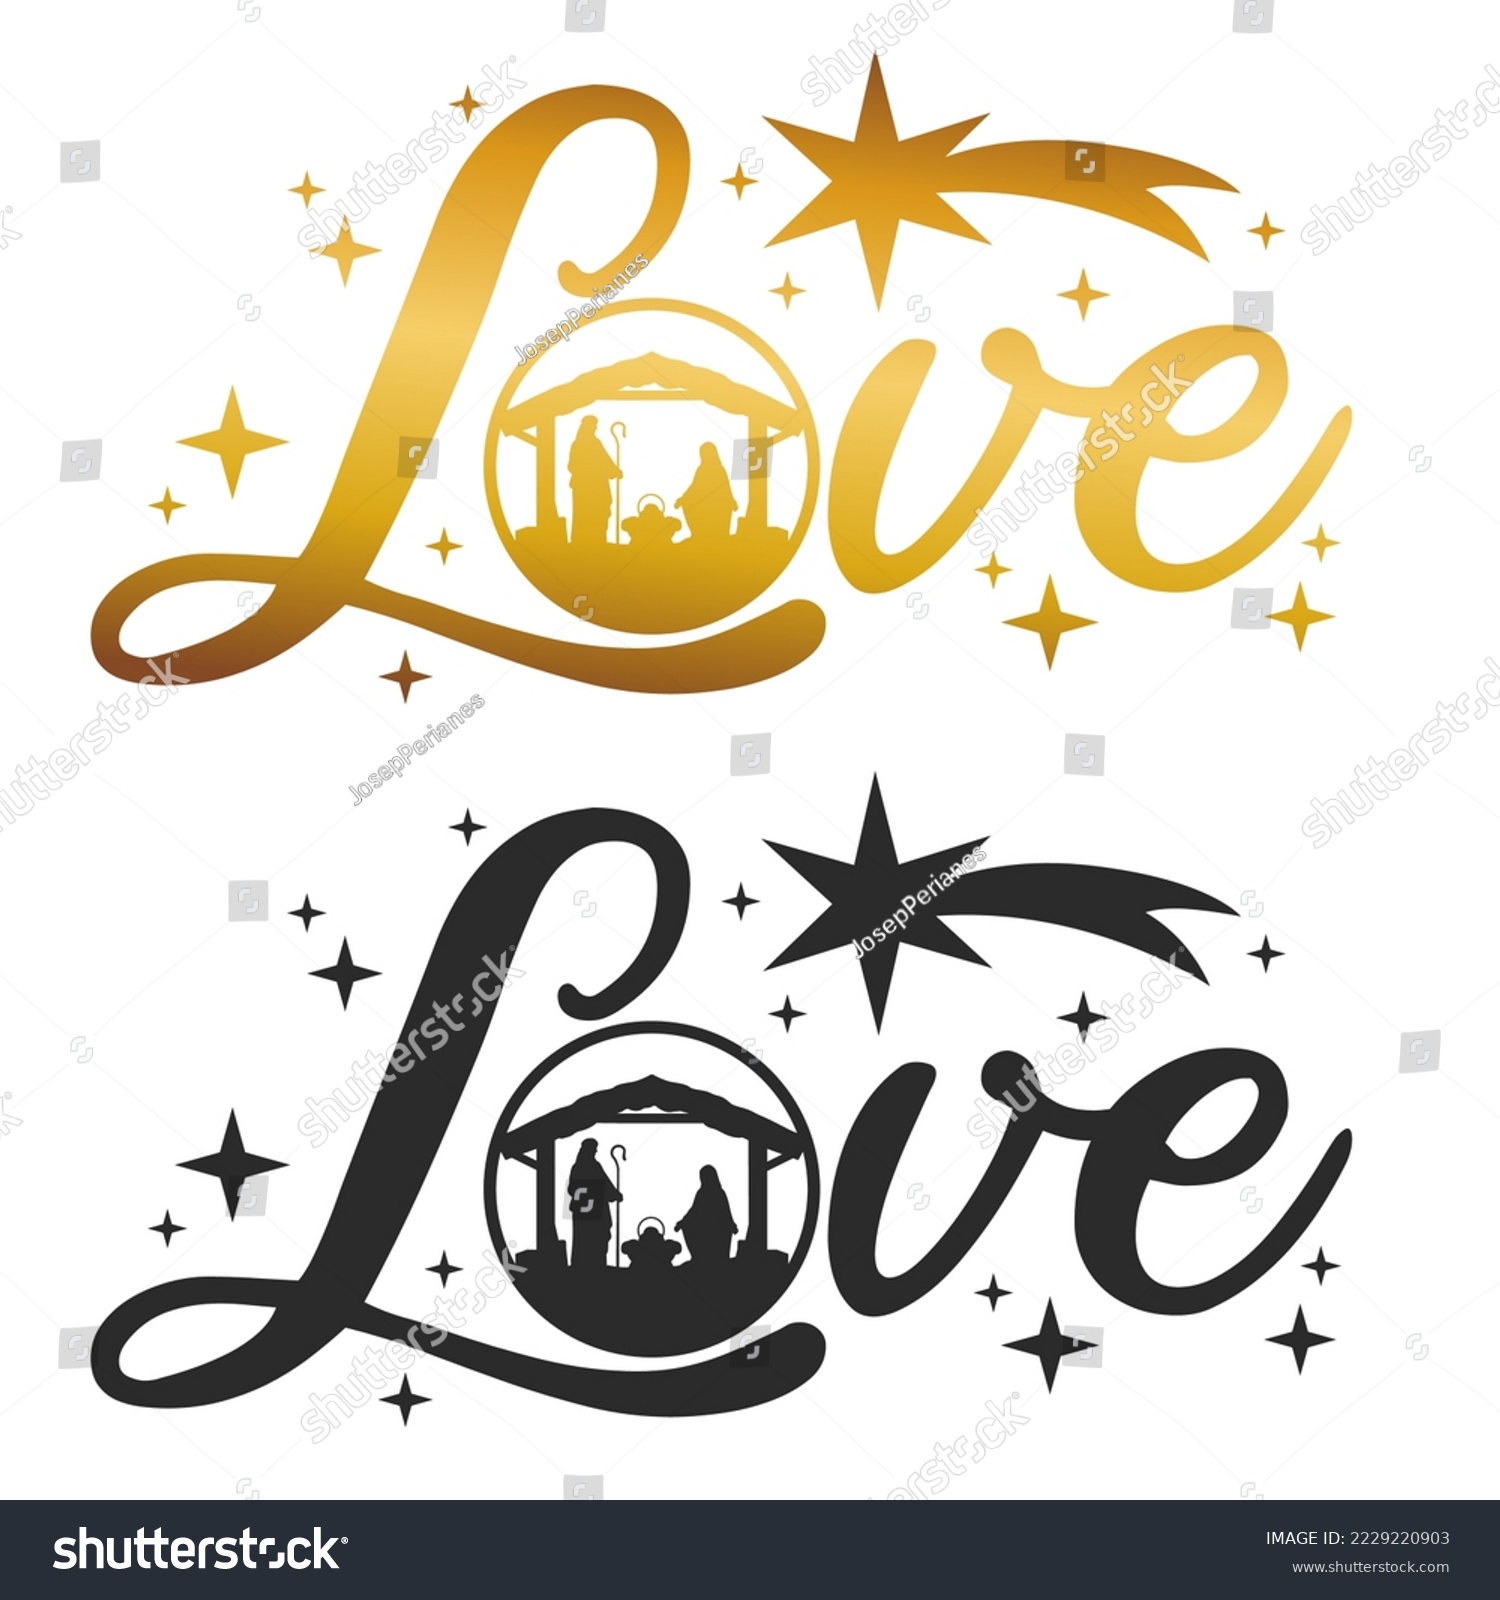 SVG of Love Nativity Scene Silhouette. Holidays Christmas Religion. Holly Night Characters. Cut File Design. Vector Clip Art. svg